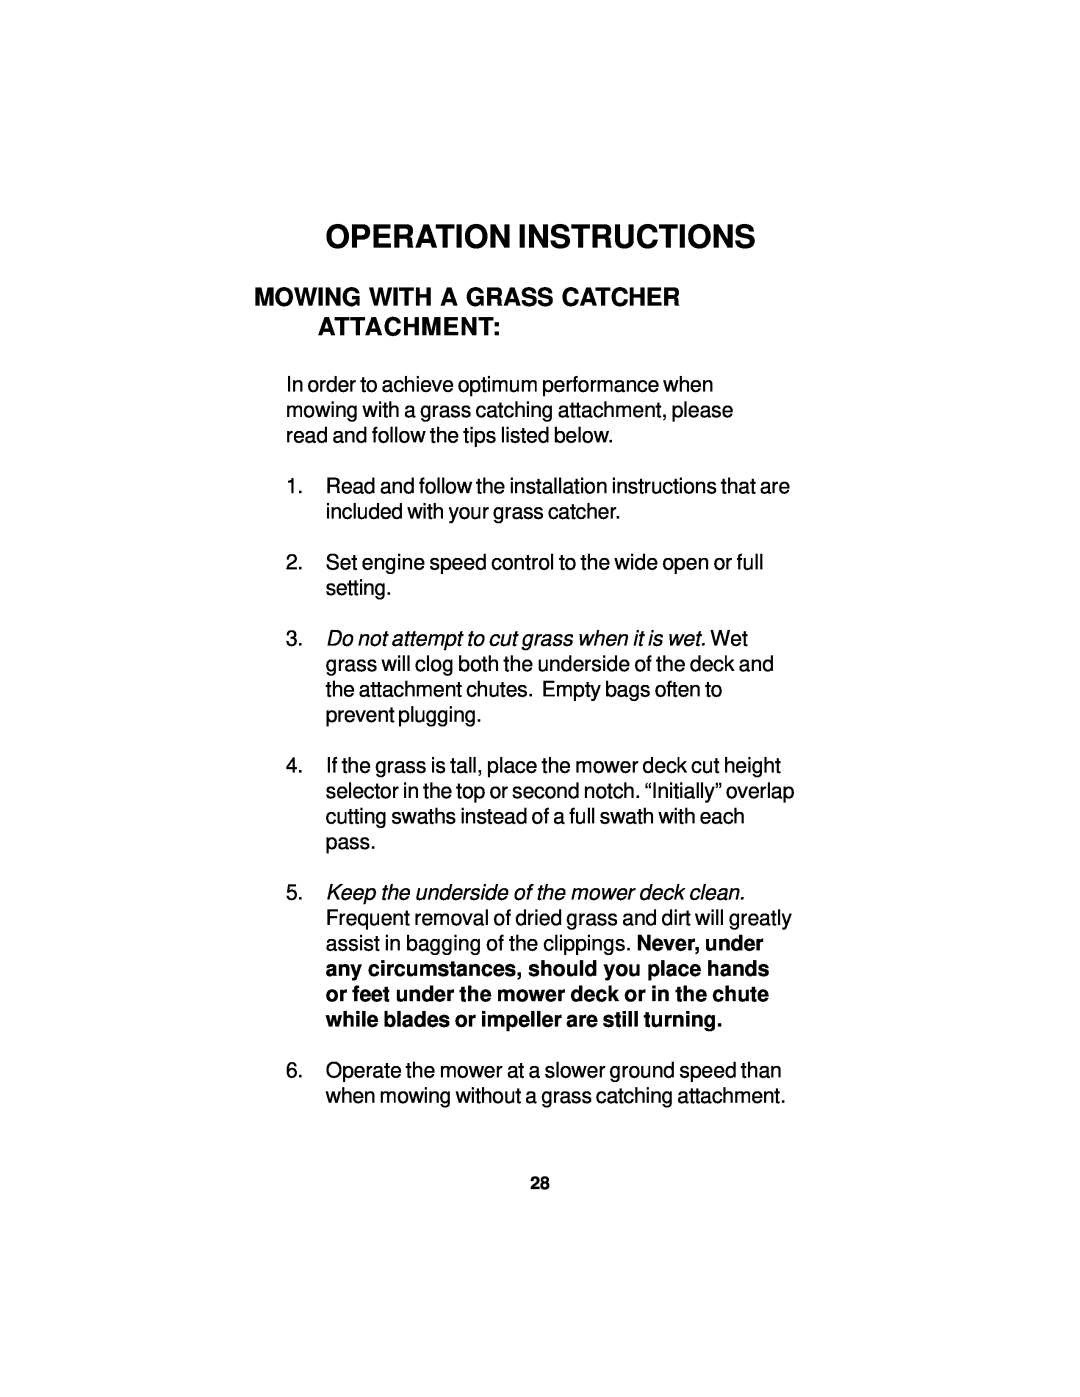 Dixon 14295-0804 manual Mowing With A Grass Catcher Attachment, Operation Instructions 